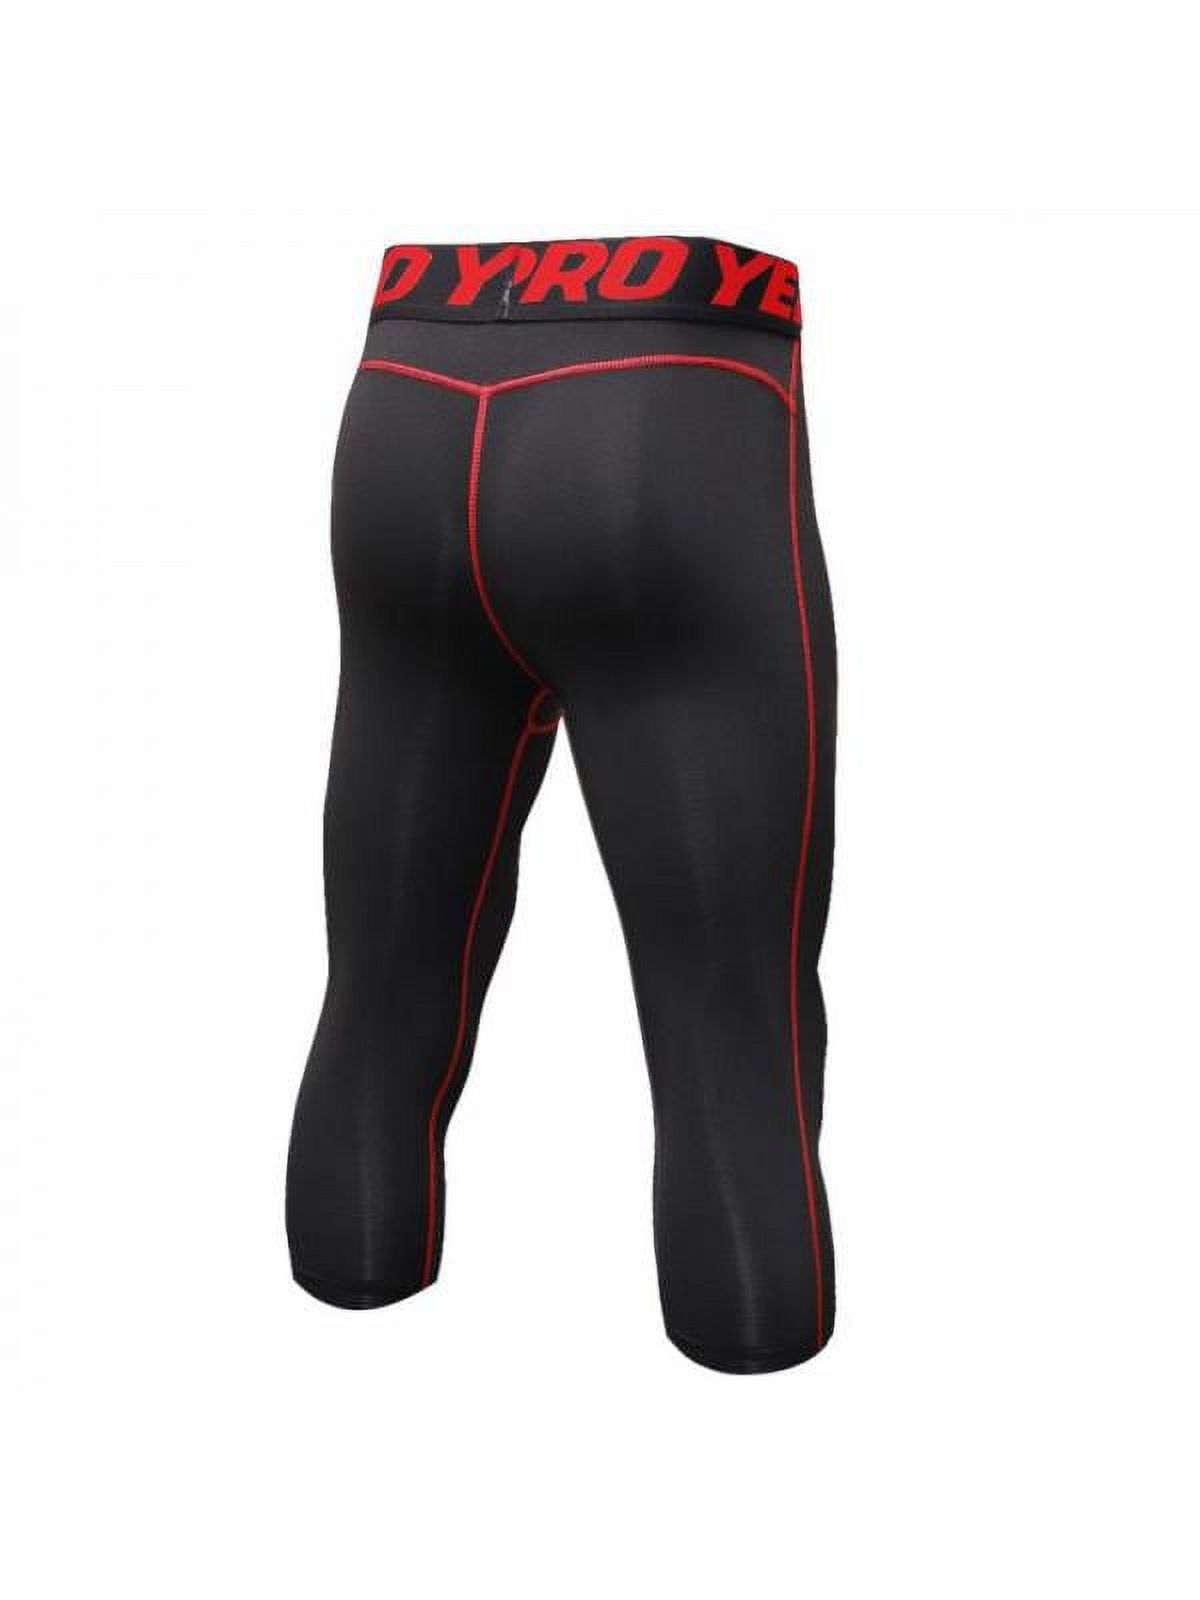 Lavaport 3/4 Men’s Compression Sports Tights Pants Baselayer Running Leggings - image 2 of 2